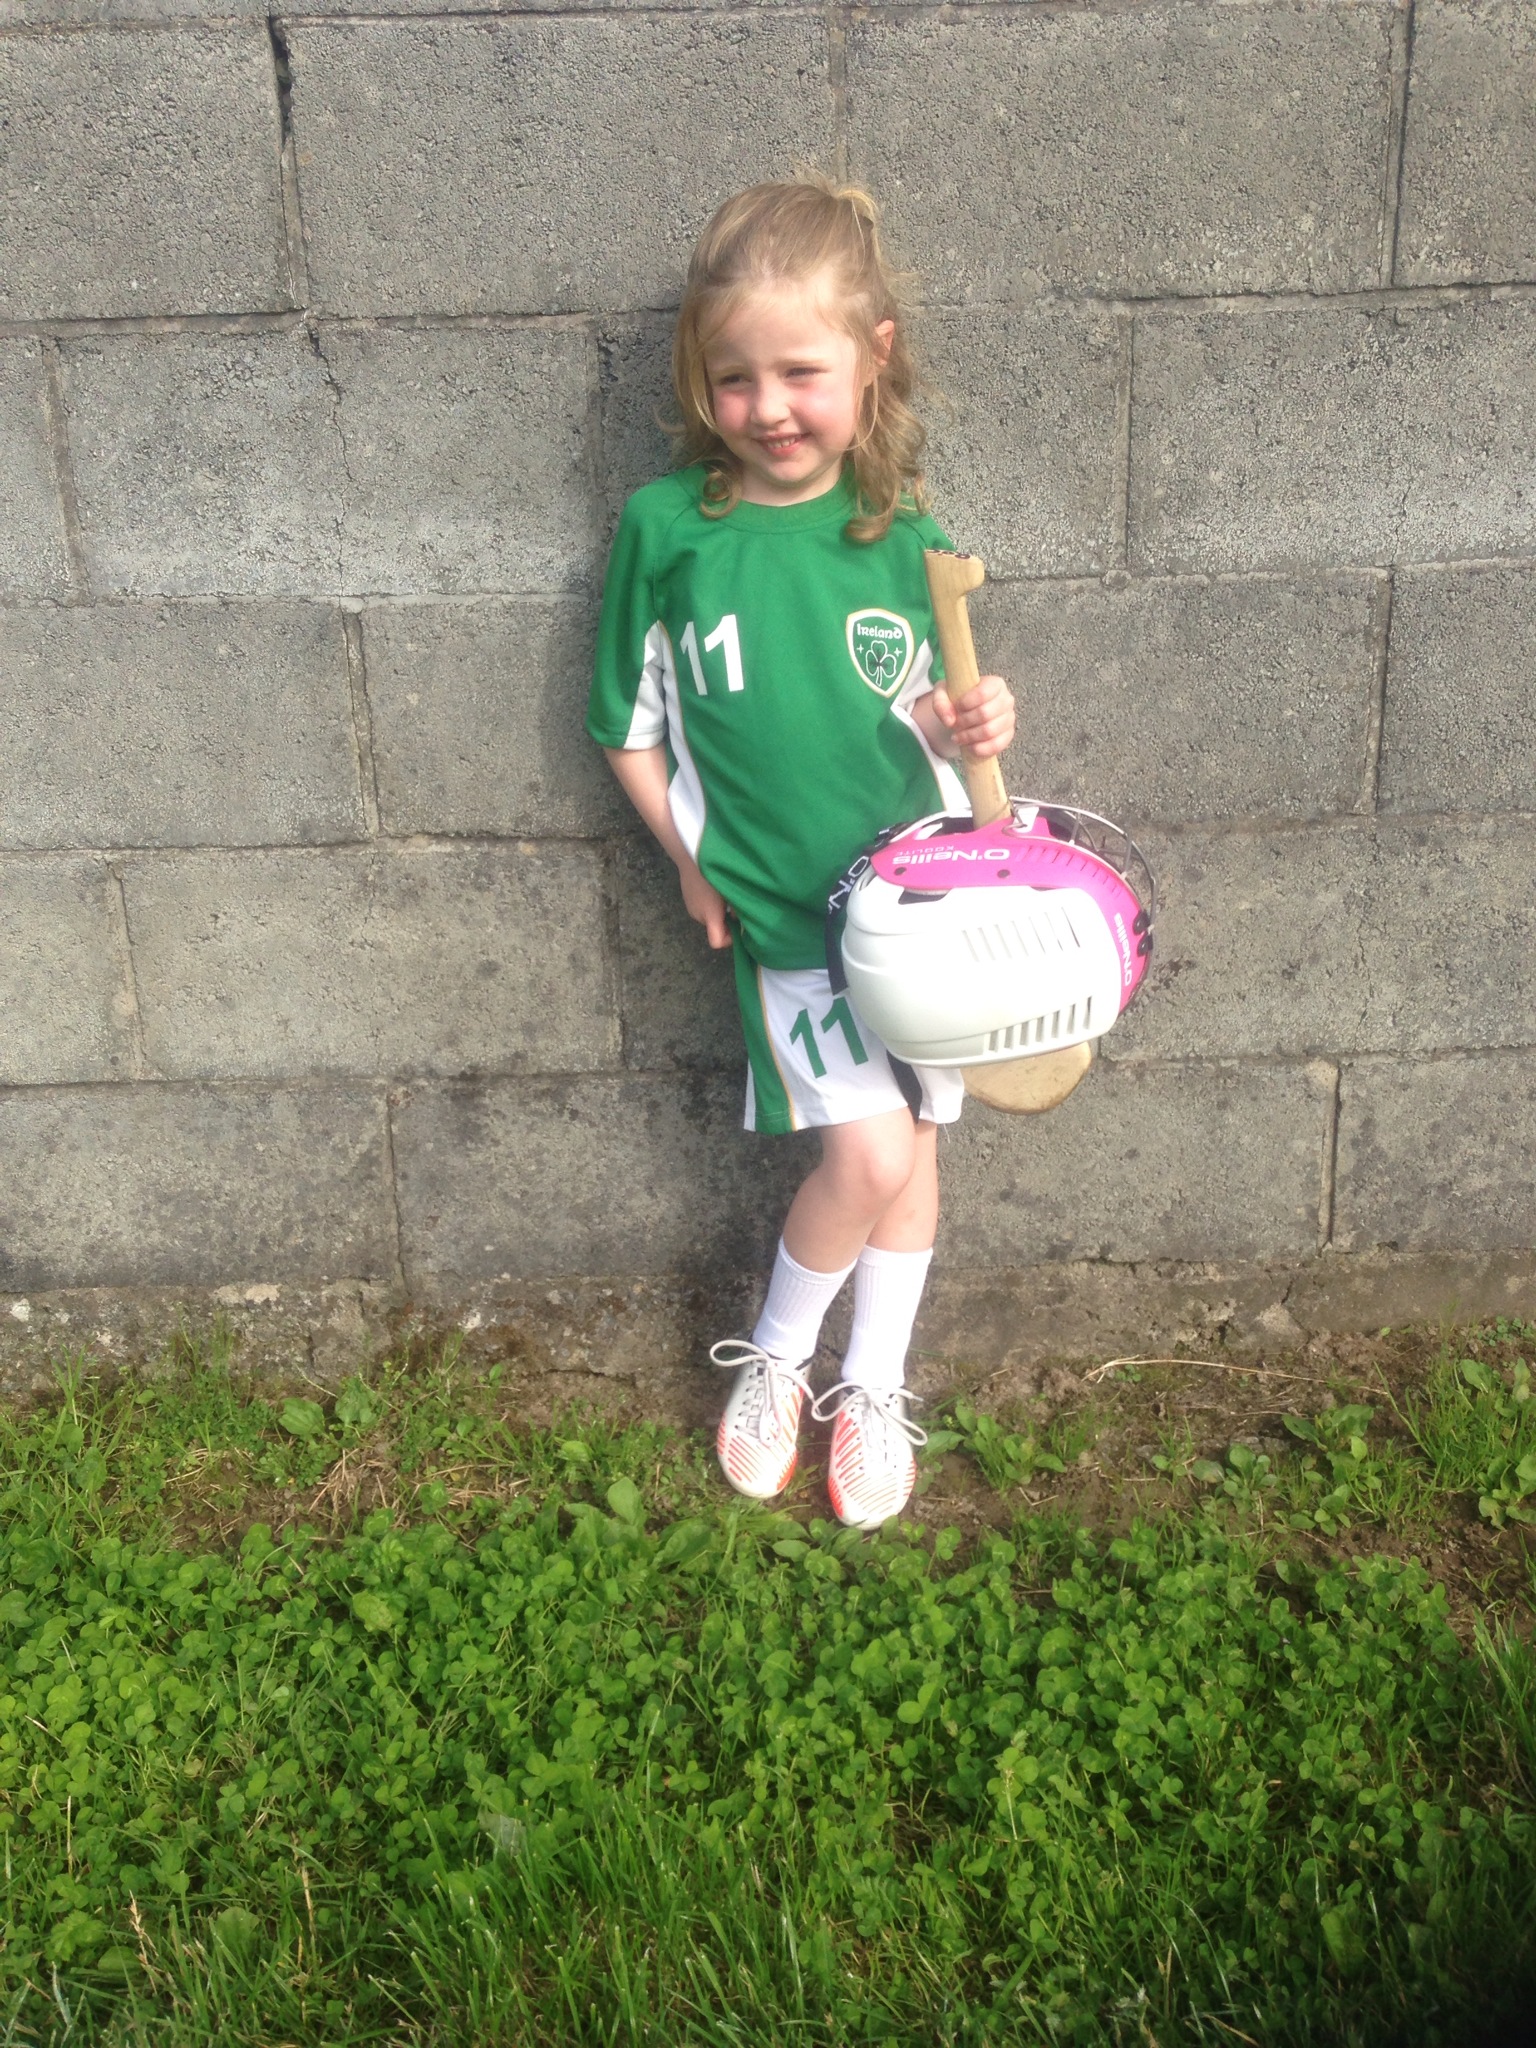 Robyn the hurler